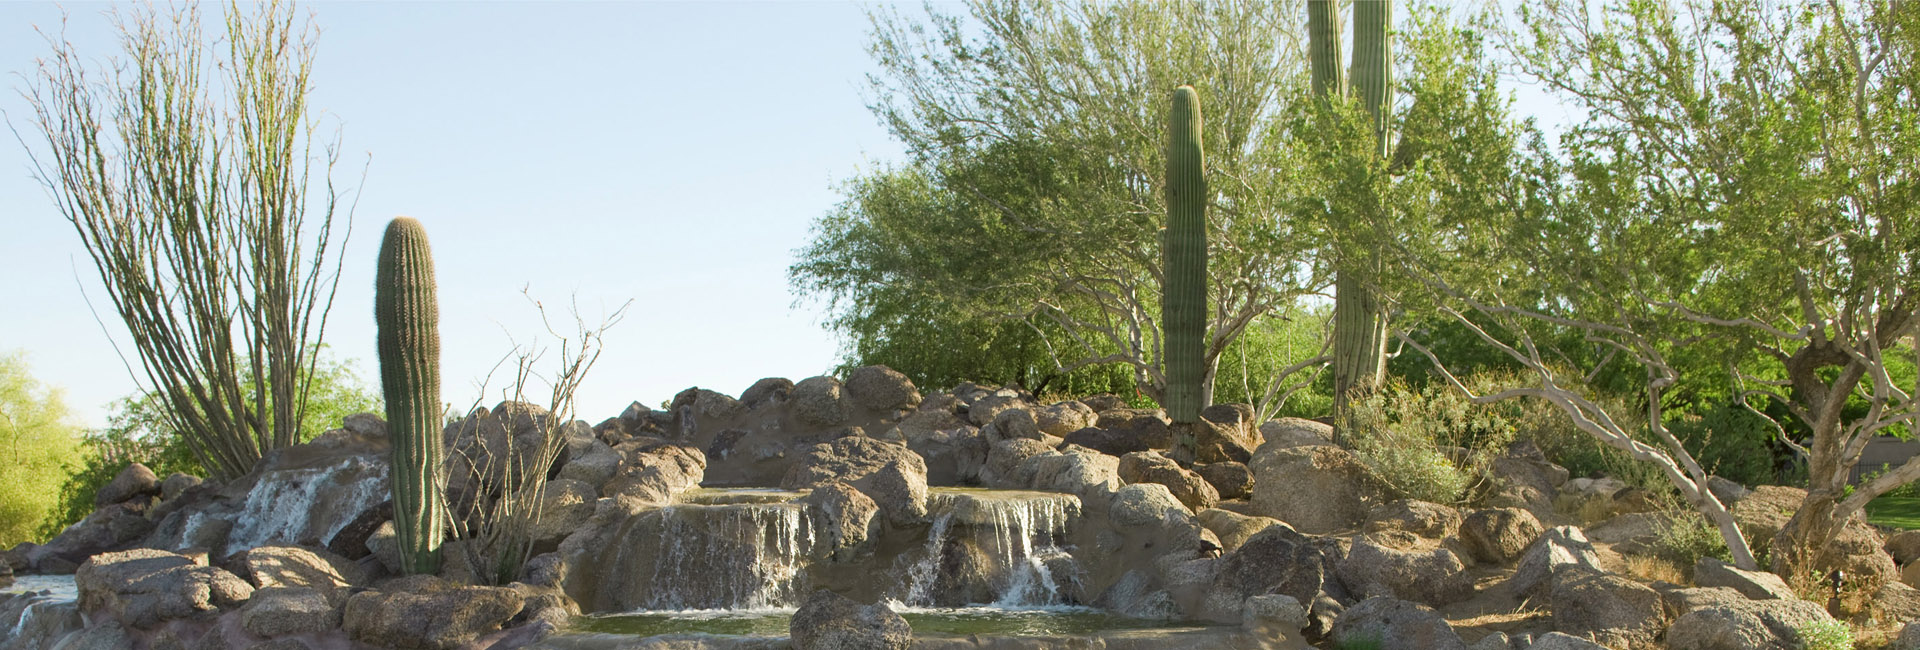 Outdoor Rock and Water Feature With Cactus Plants